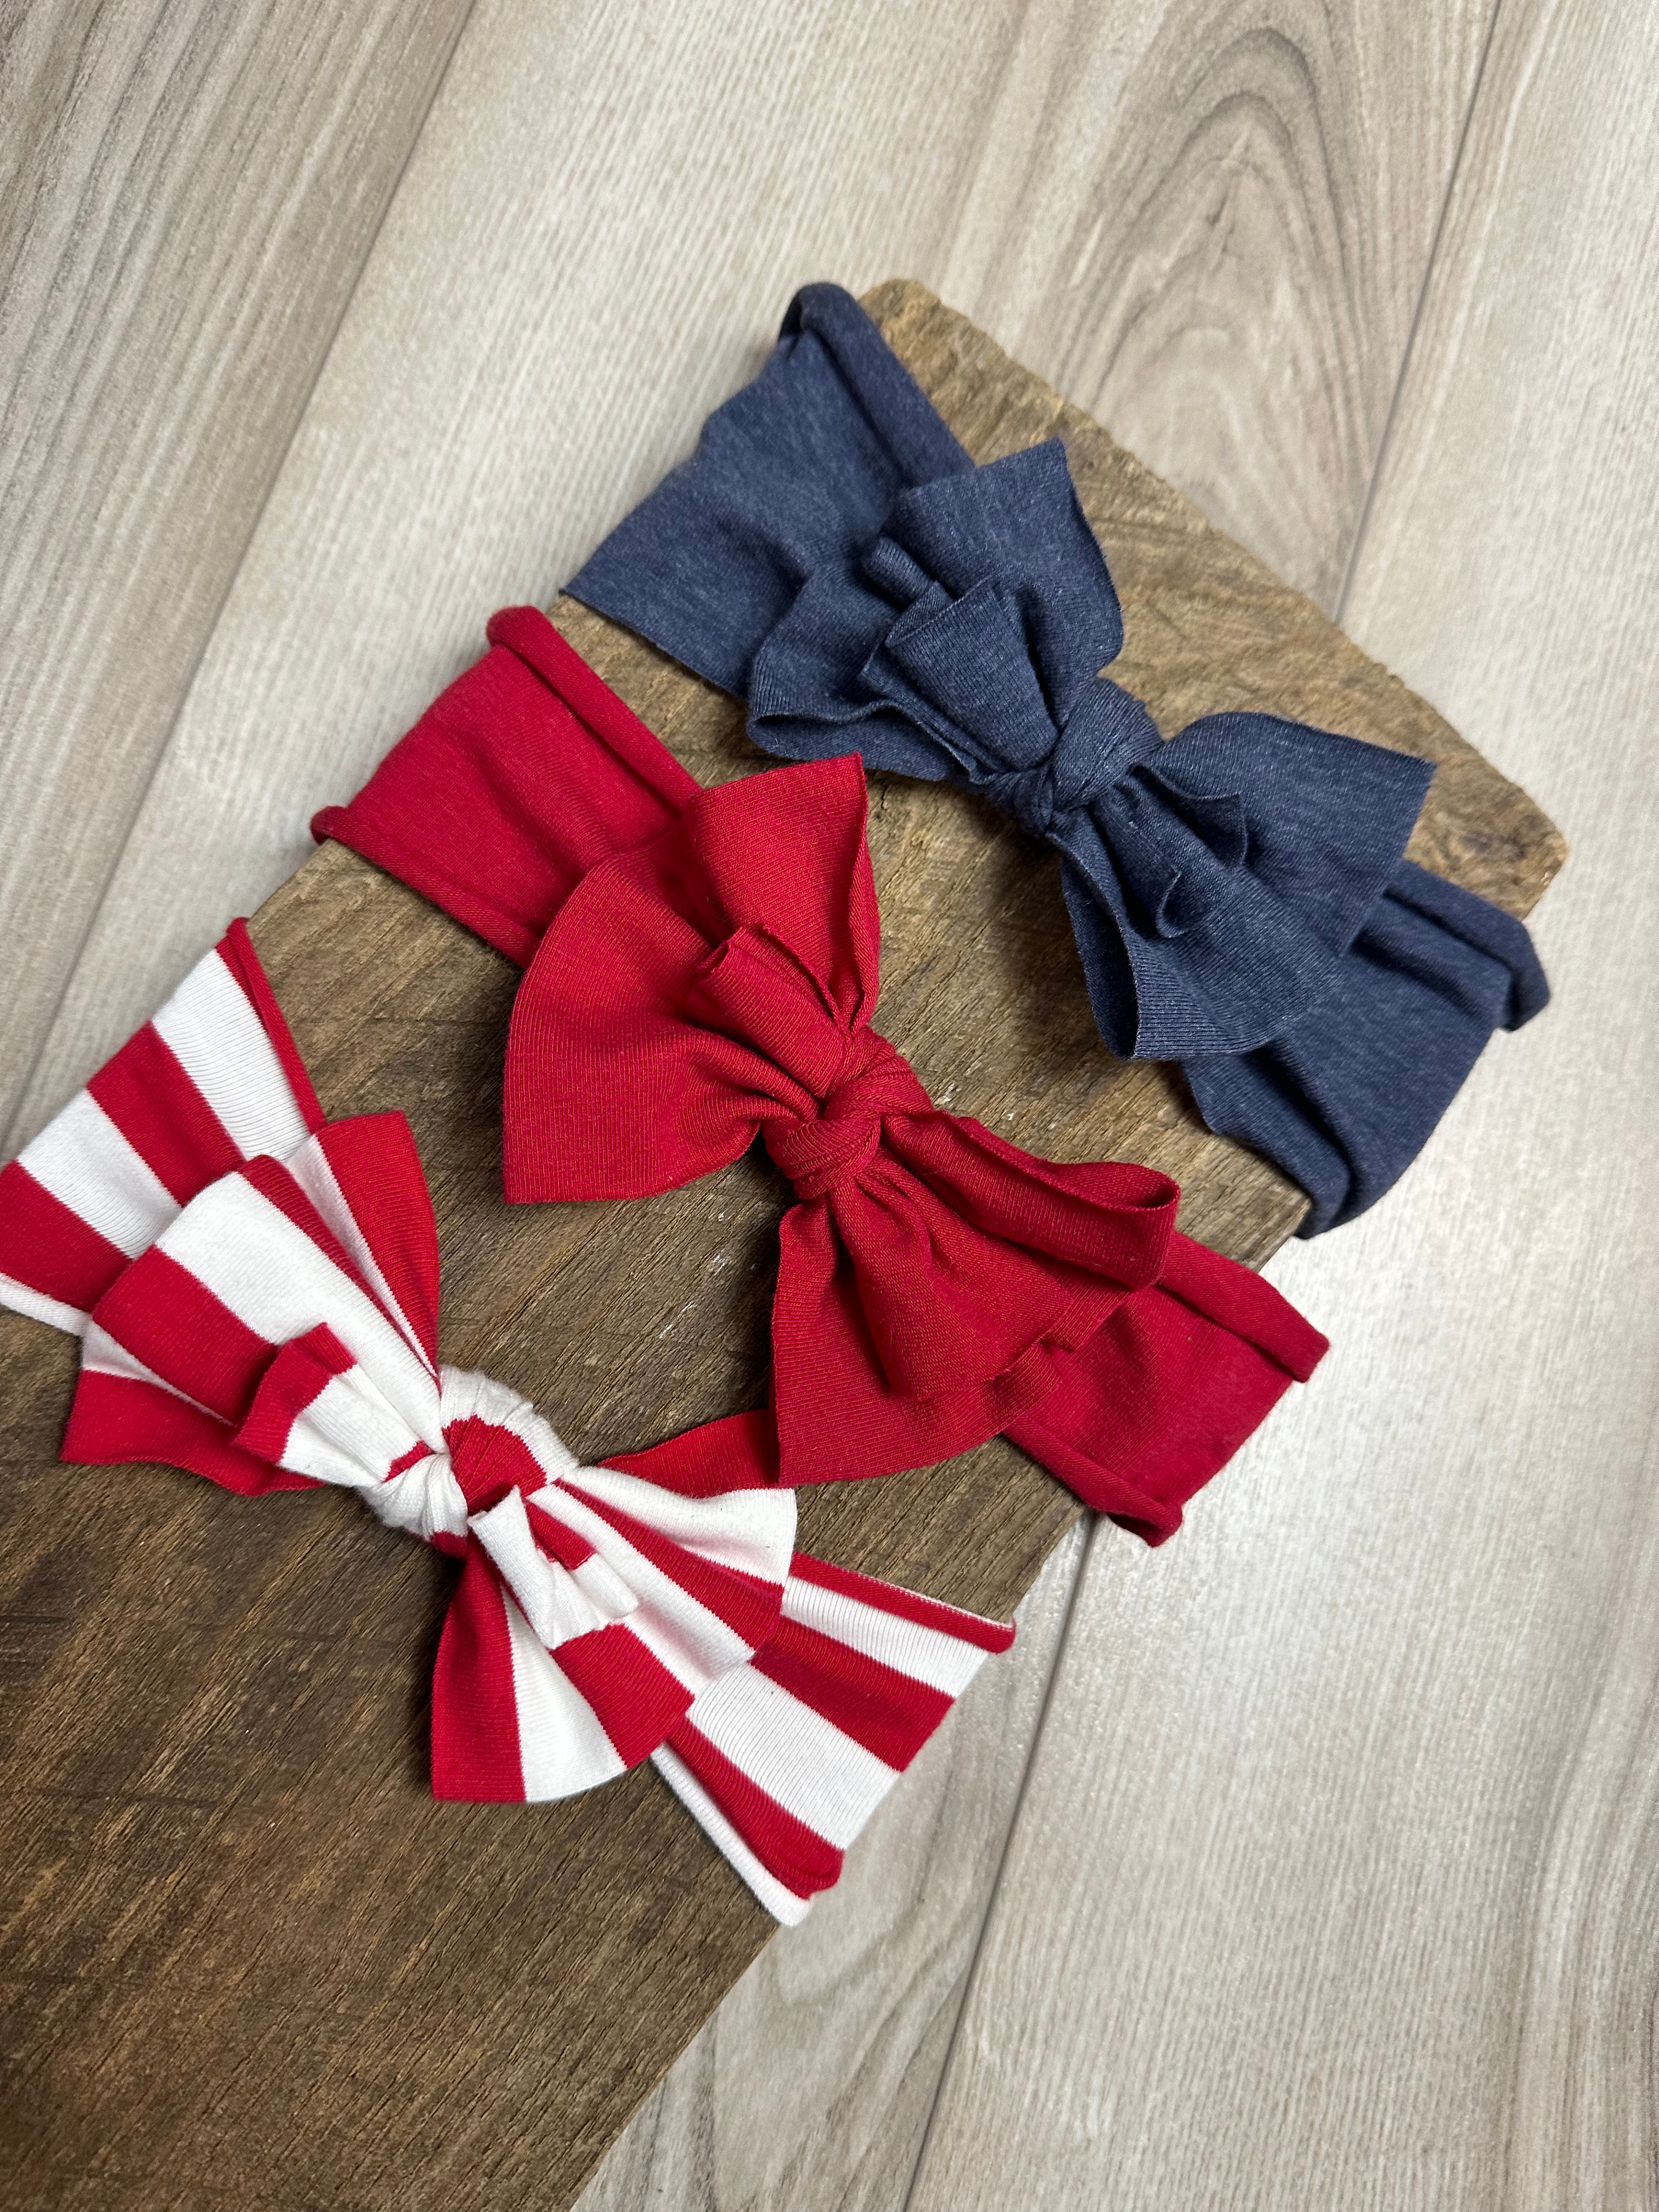 Red White and Blue Headbands